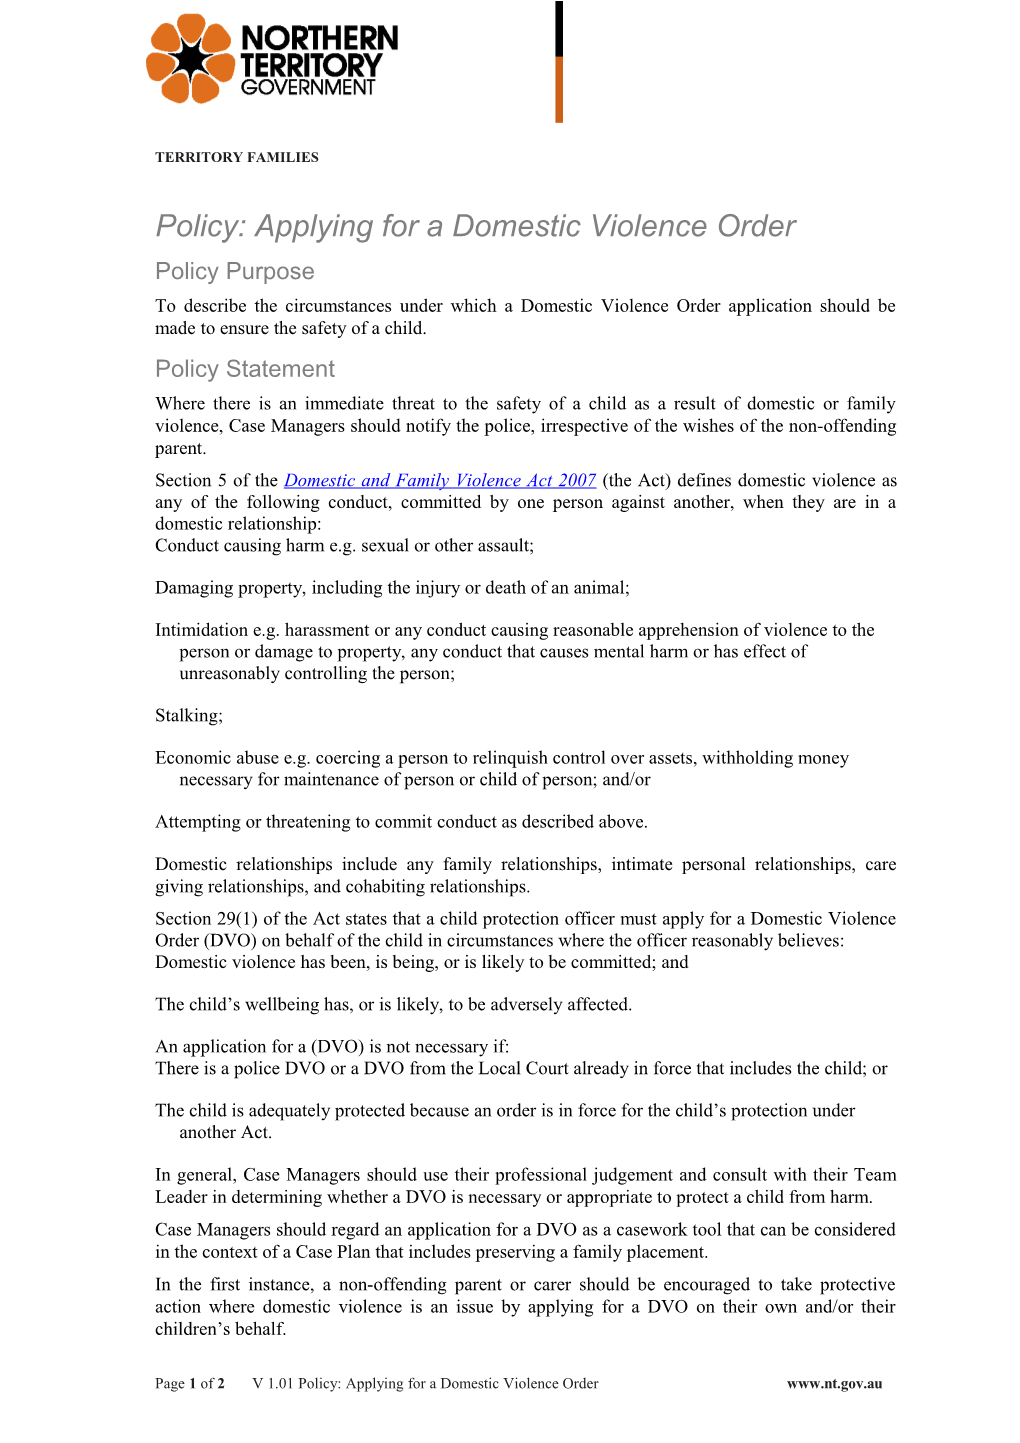 Policy: Applying for a Domestic Violence Order